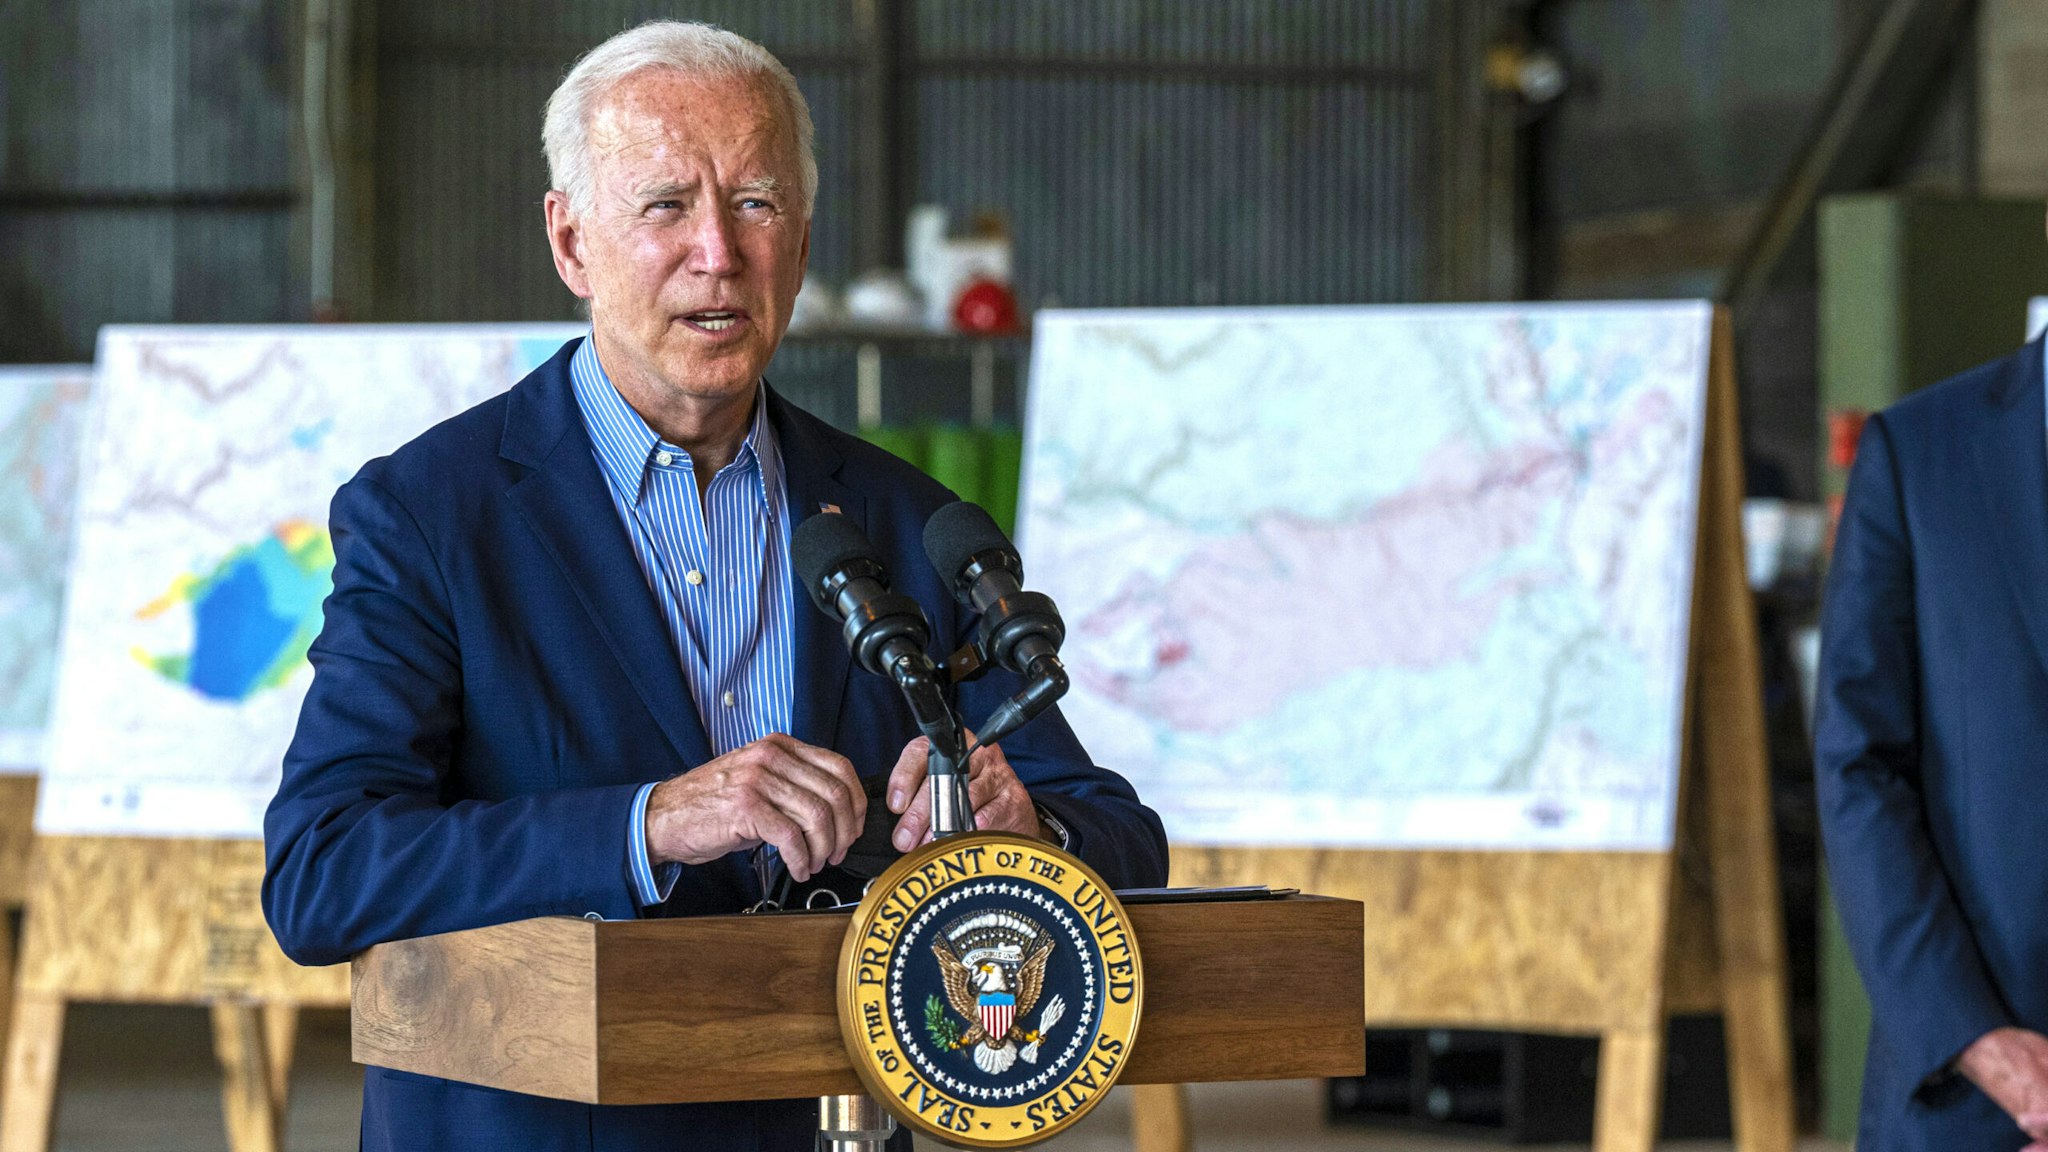 U.S. President Joe Biden speaks as Gavin Newsom, governor of California, listens at Sacramento Mather Airport in Mather, California, U.S., on Monday, Sept. 13, 2021. Biden warned in California that wildfires are being supercharged by climate change and called on Congress to approve an infrastructure package that includes funding for resilience programs.